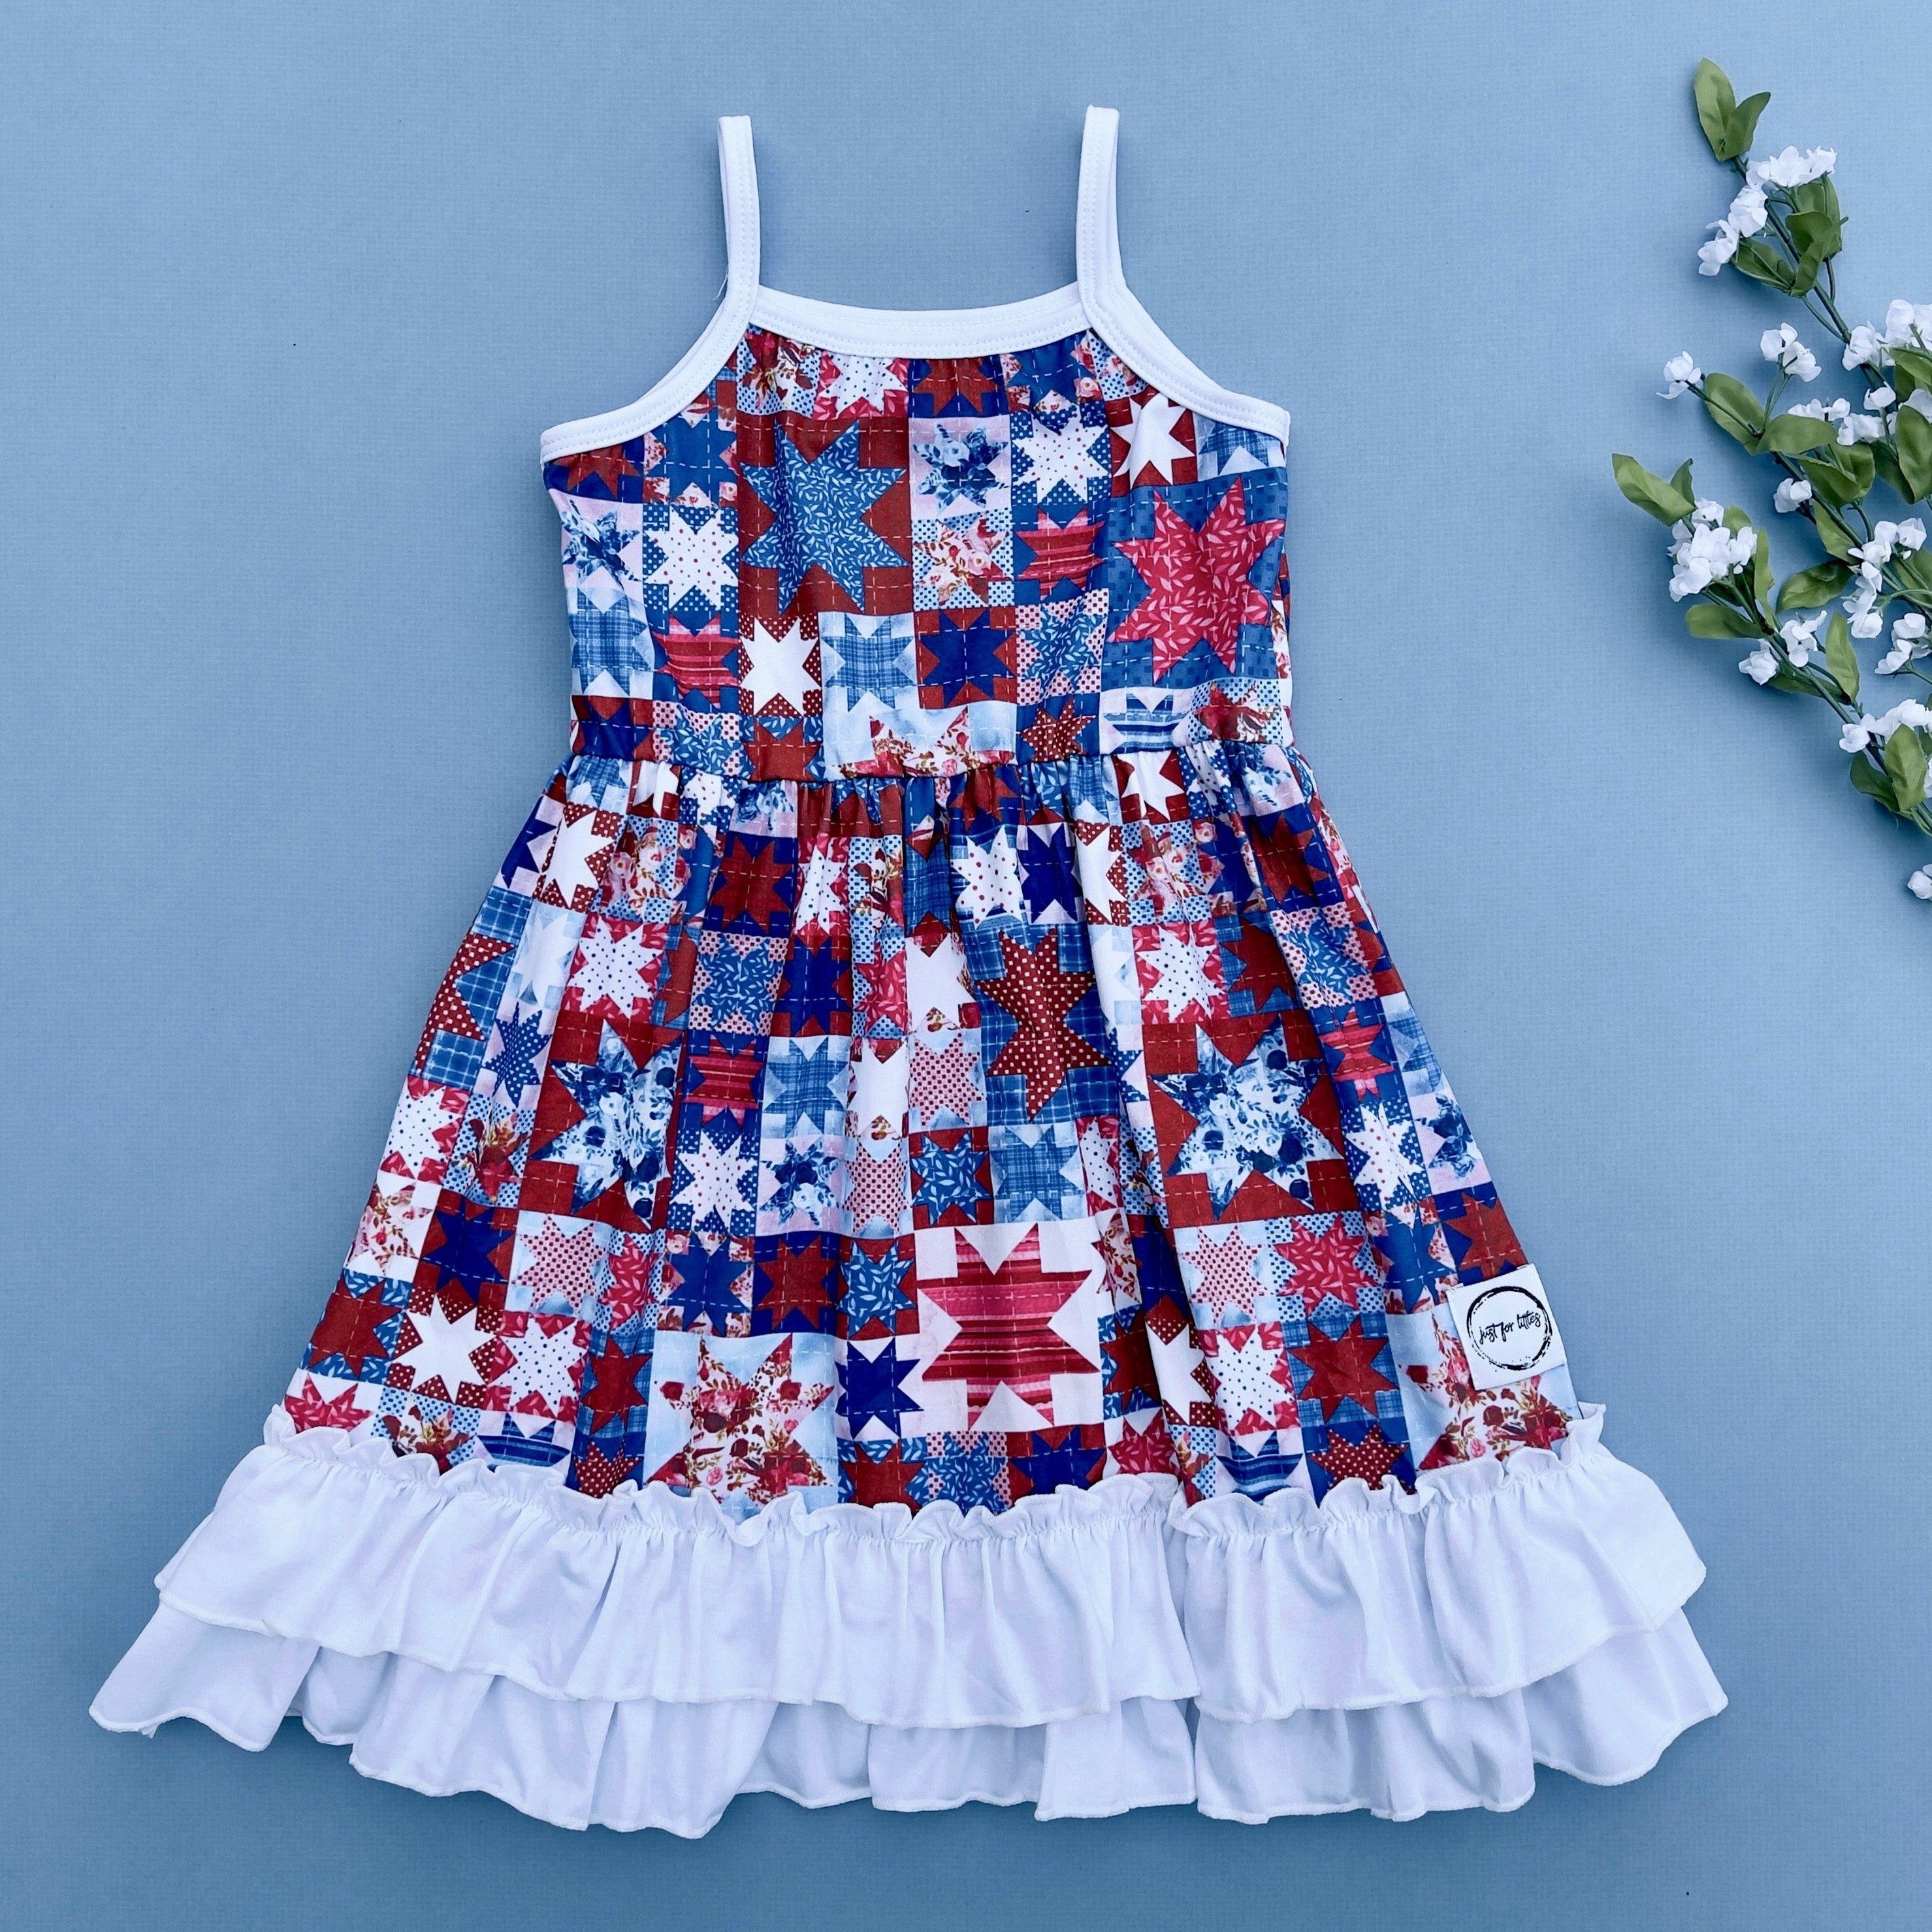 Patchwork Dress With Pockets